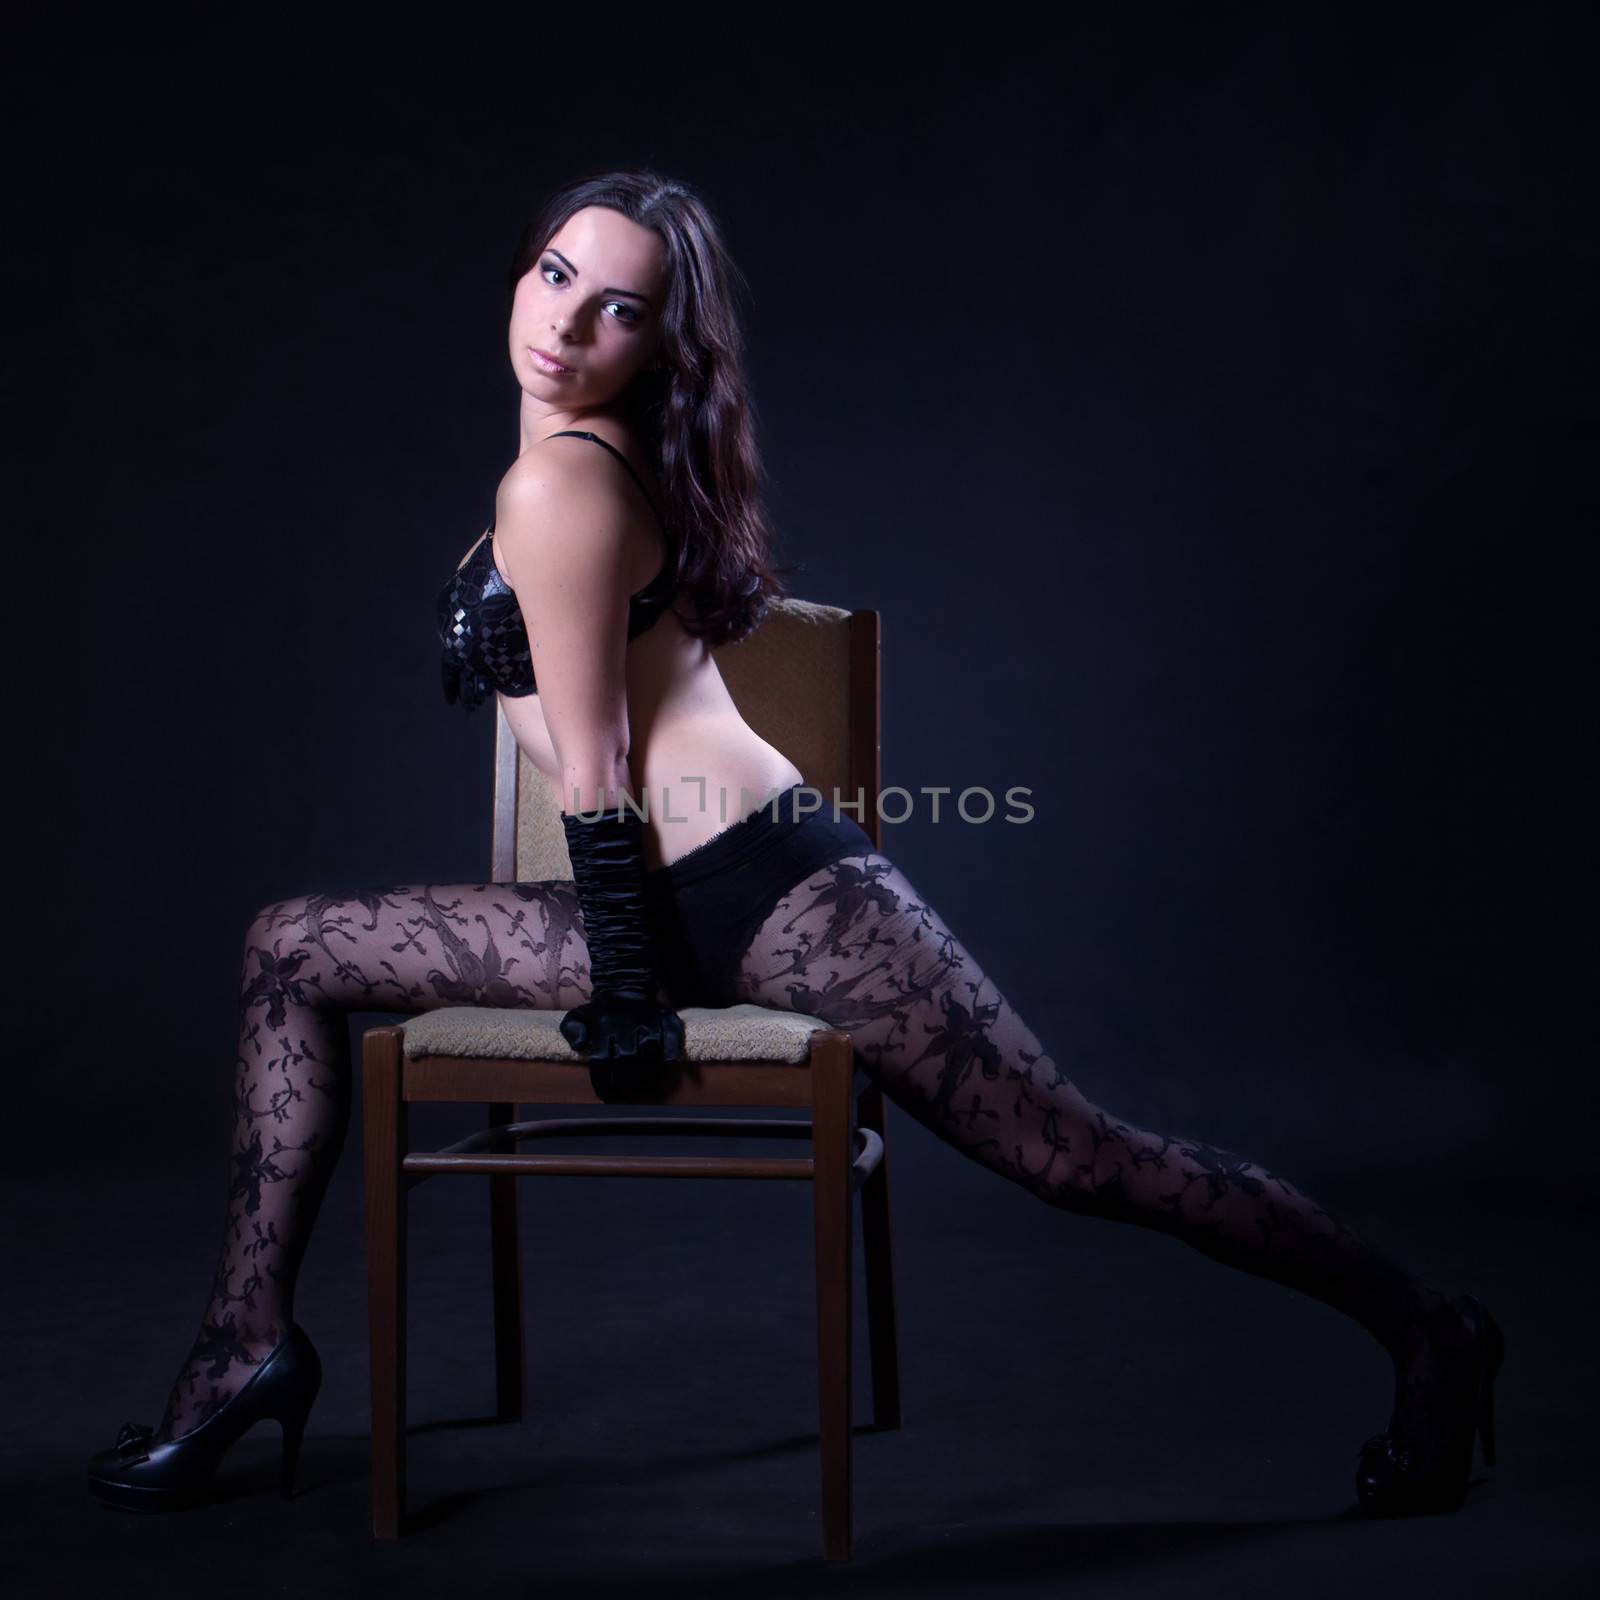 Young woman in bra and patterned stockings makes spread eagle on the chair